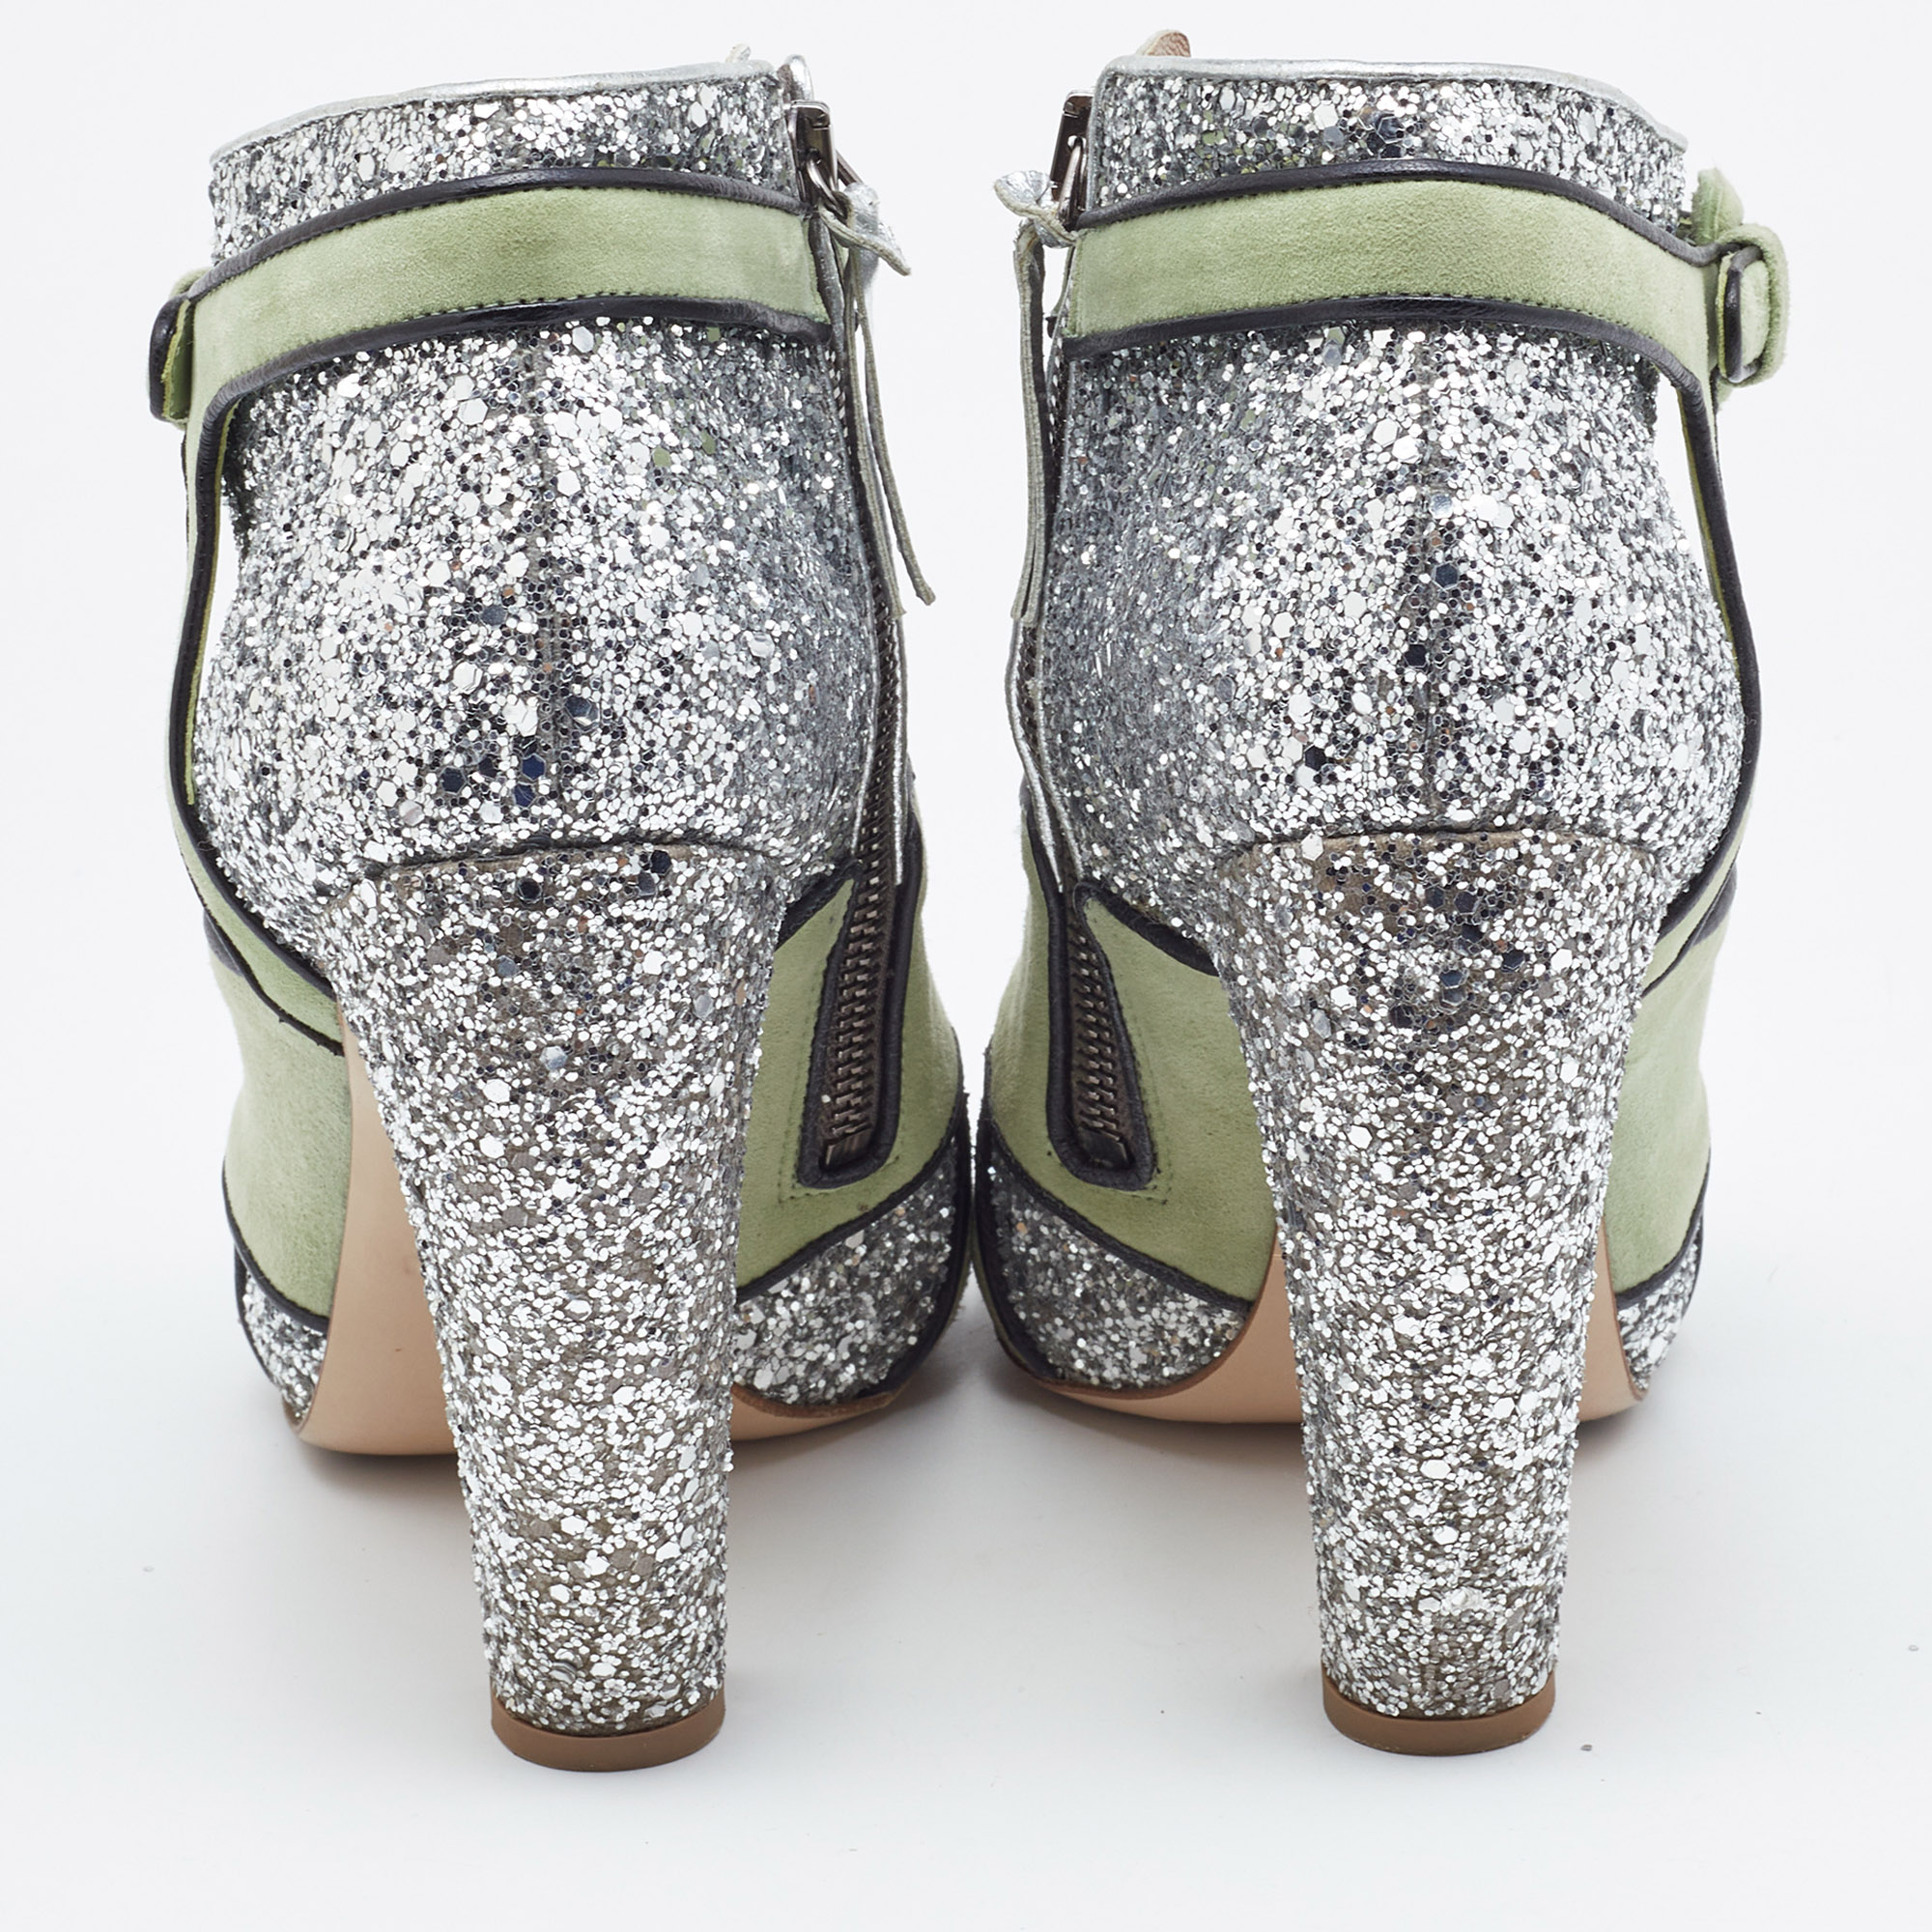 Miu Miu Green/Silver Glitter And Suede Peep-Toe Ankle Boots Size 39